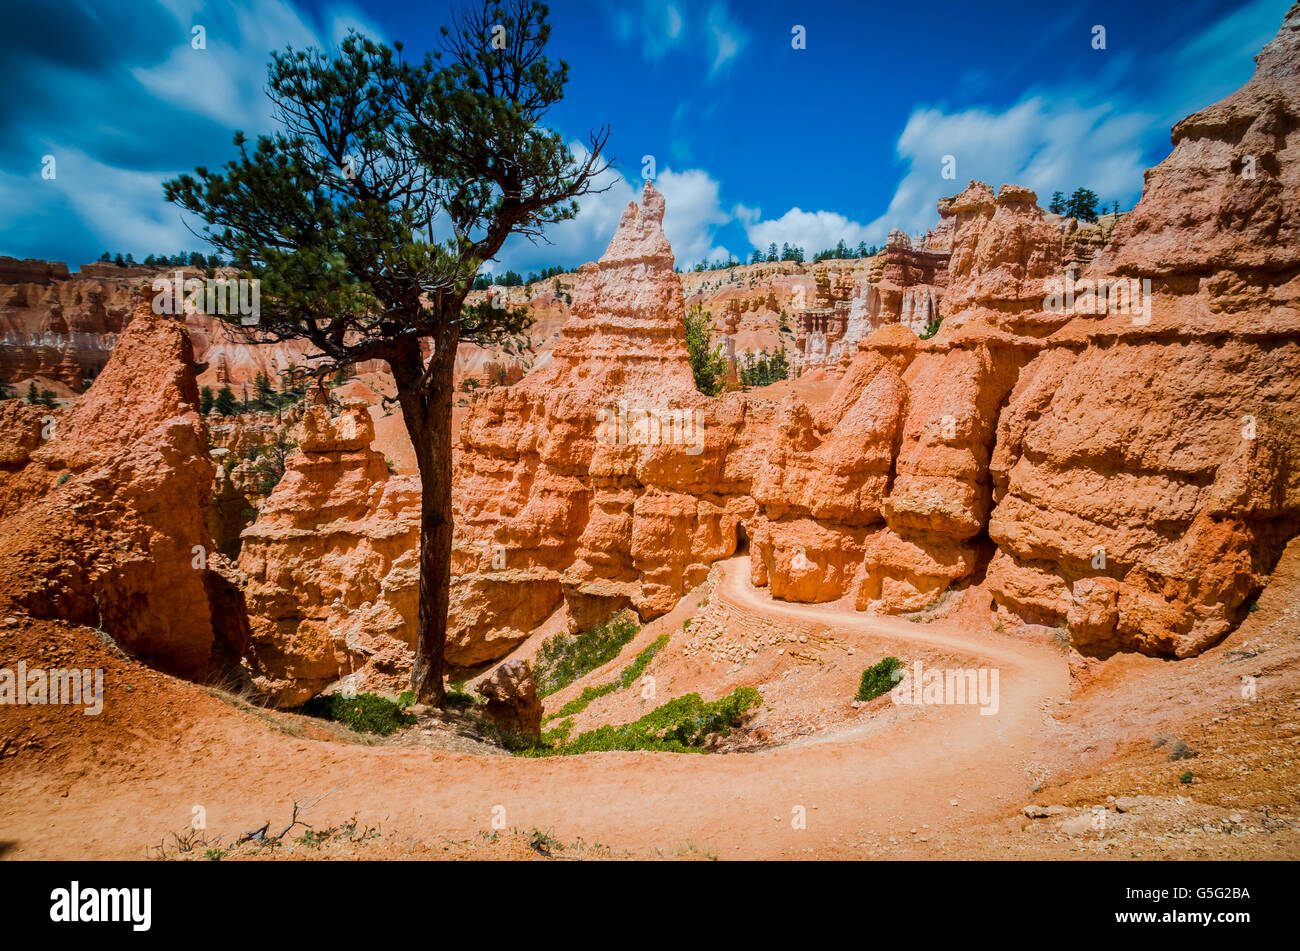 An Adventure in Bryce Canyon National Park Stock Photo